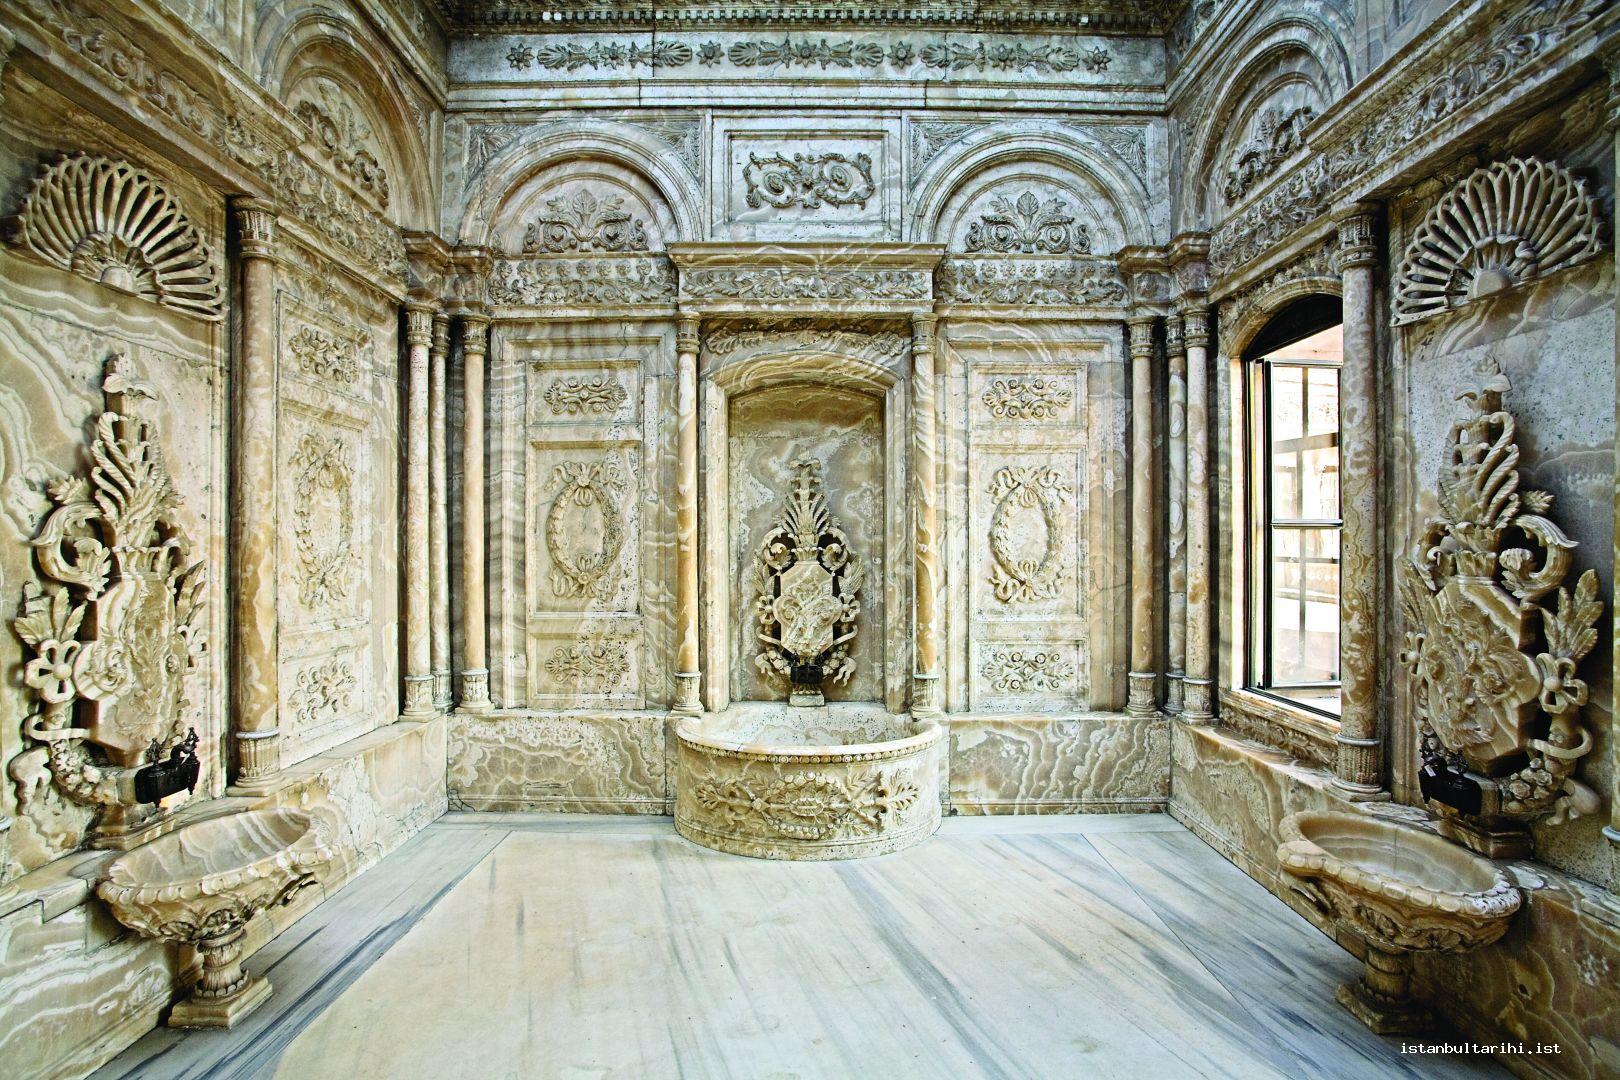 9- The sultan’s bath room in Dolmabahçe Palace